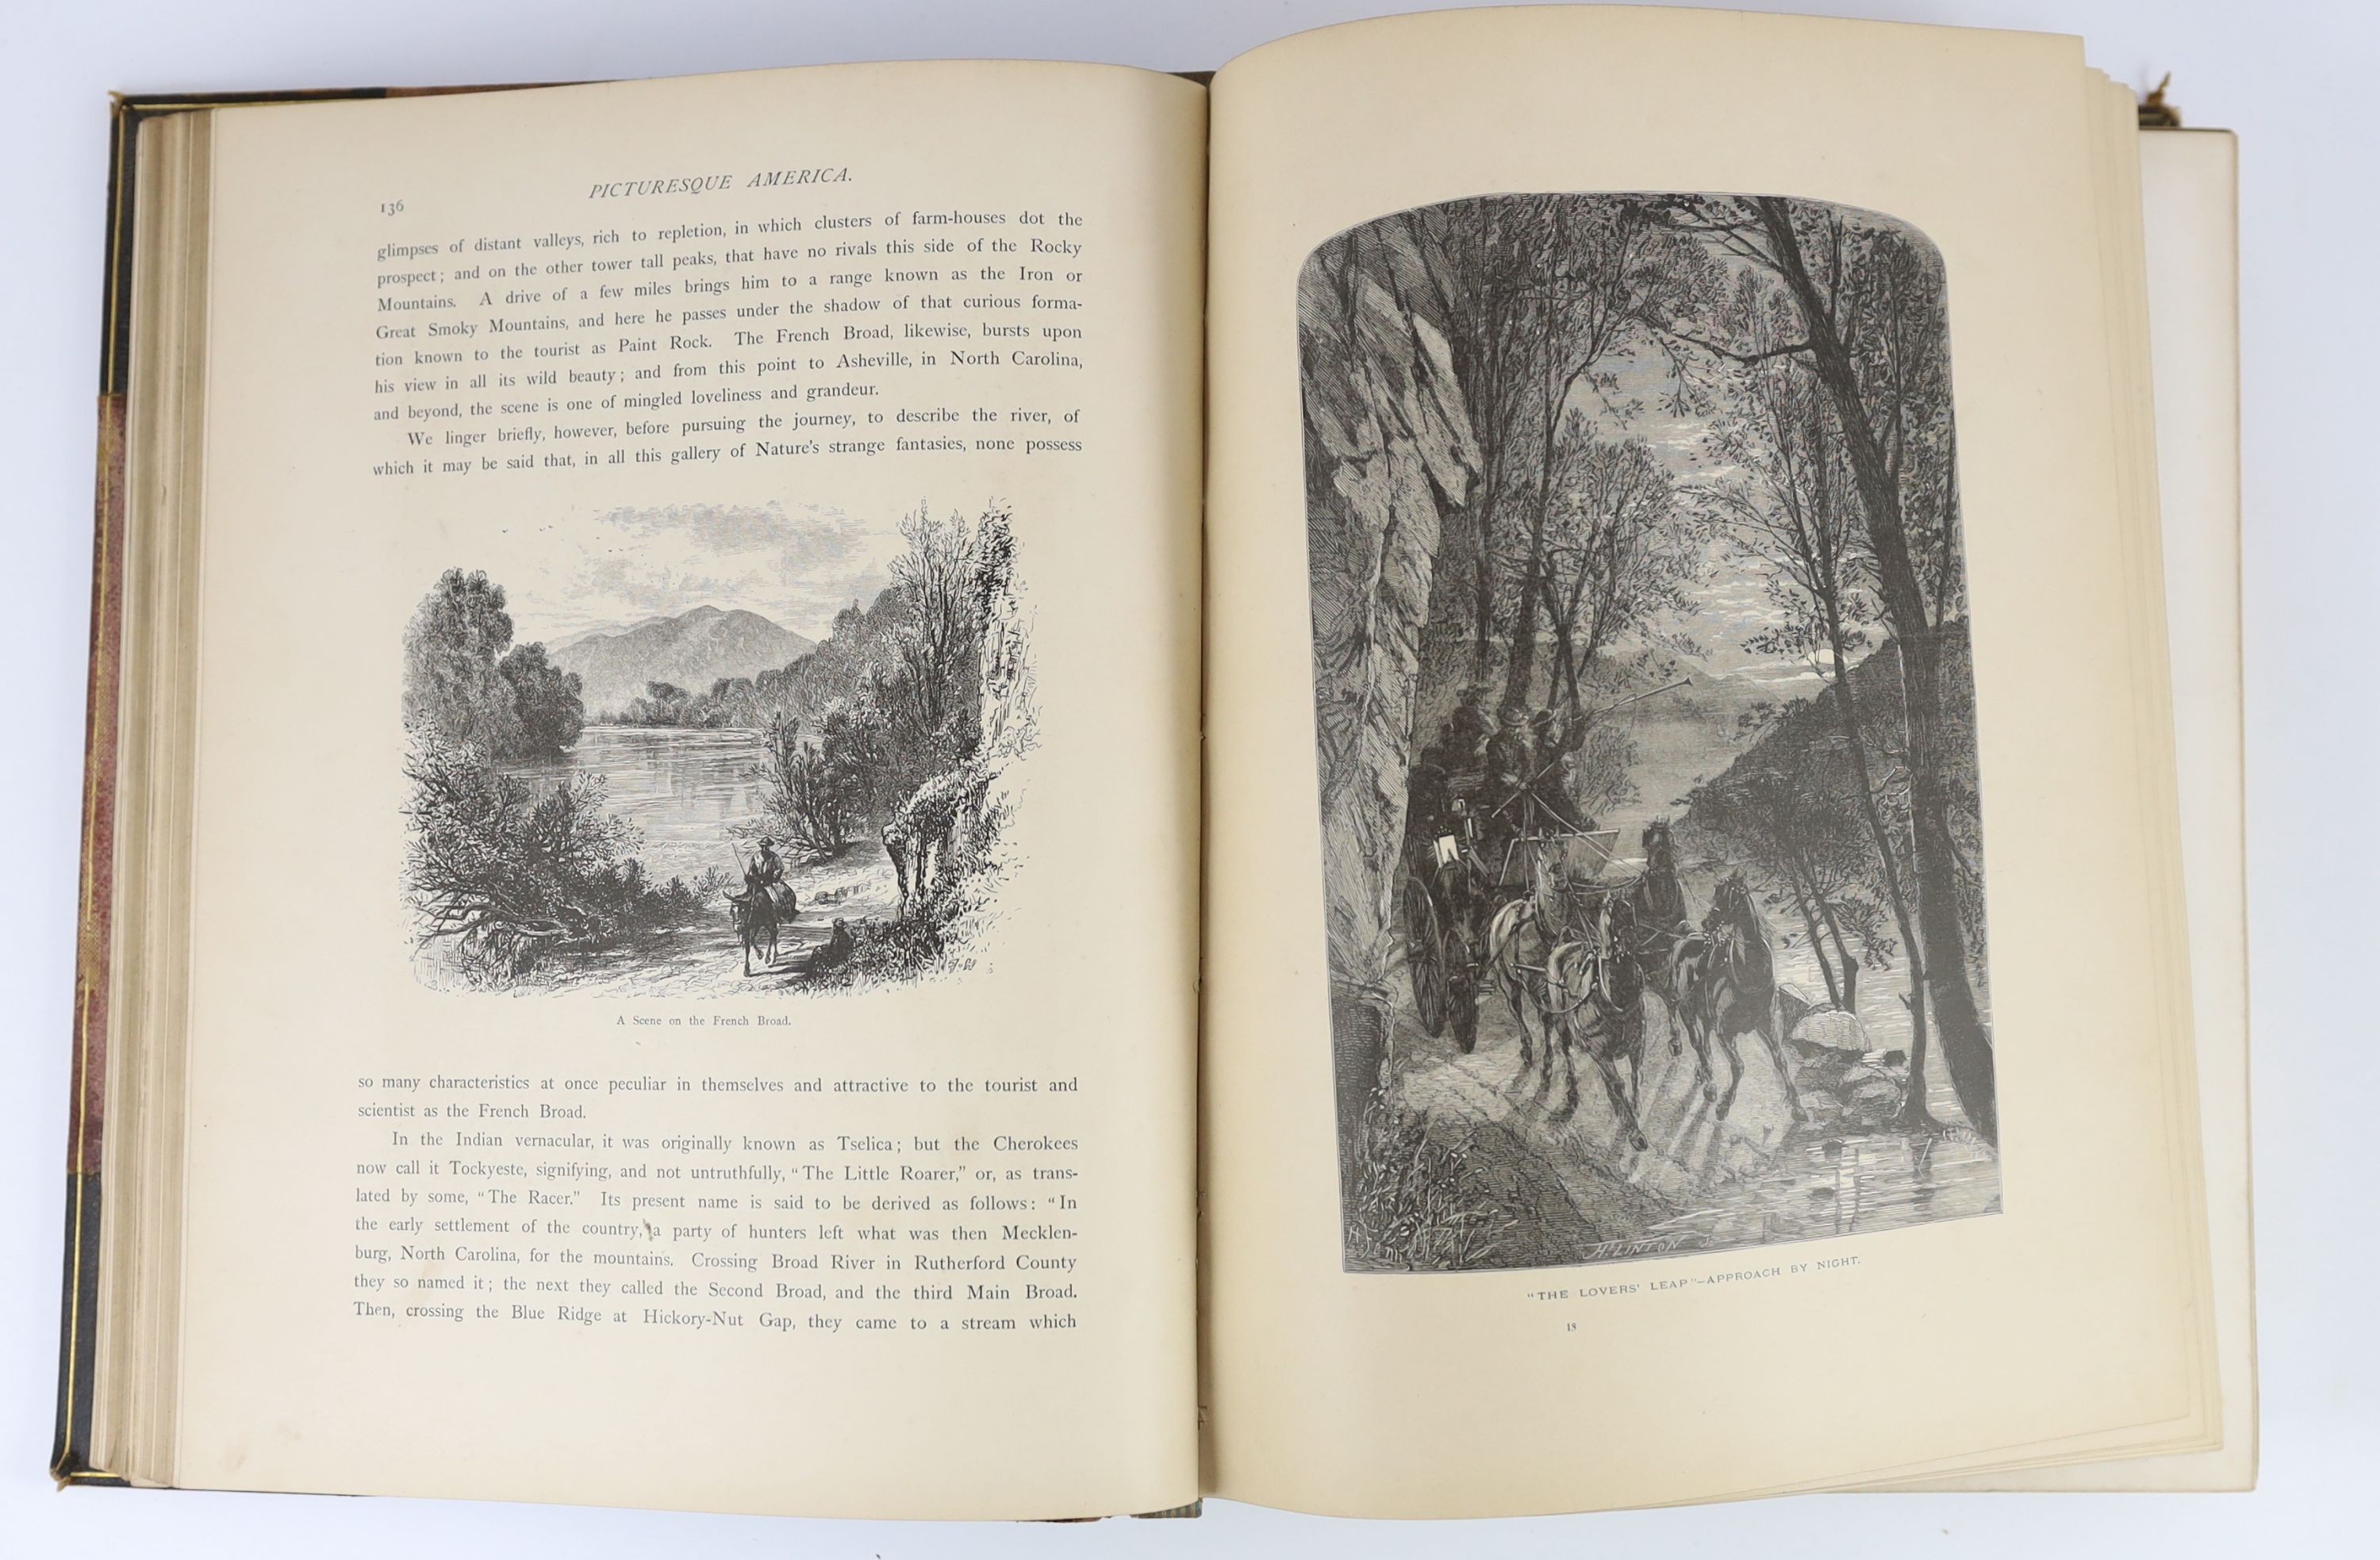 Bryant, William Cullen (editor) - Picturesque America; or, The Land we Live In, vol. 1 only (of 2) 4to, original half morocco, worn and torn, New York, [1872-74] and Select Views in London, 2 vols in 1, 4to, half morocco